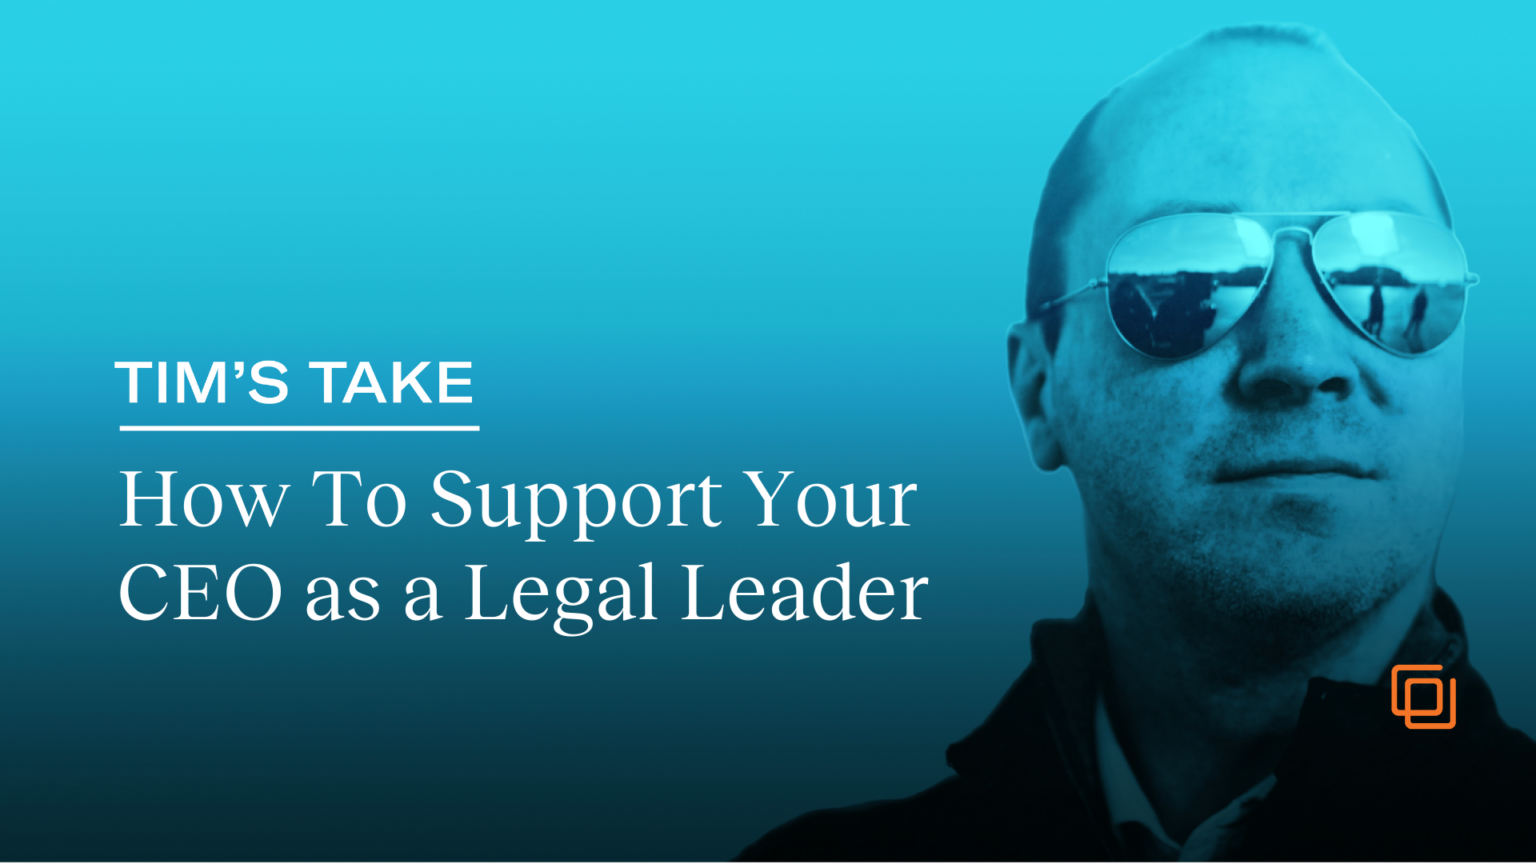 Tim's Take: How To Support Your CEO as a Legal Leader